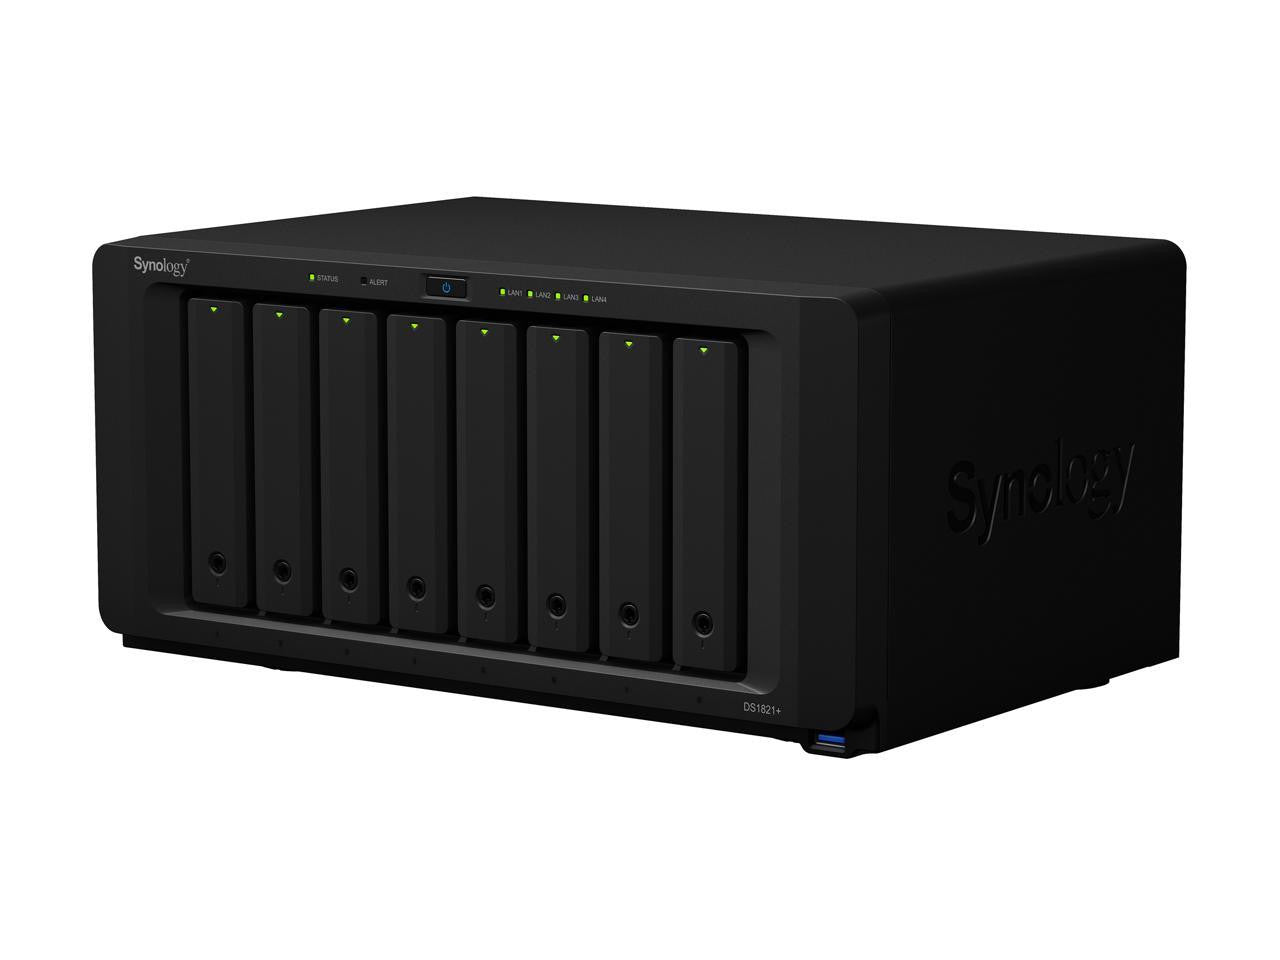 Synology DS1821+ 8-BAY DiskStation with 16GB Synology RAM and 128TB (8x16TB) Synology Enterprise HAT5300 Drives Fully Assembled and Tested